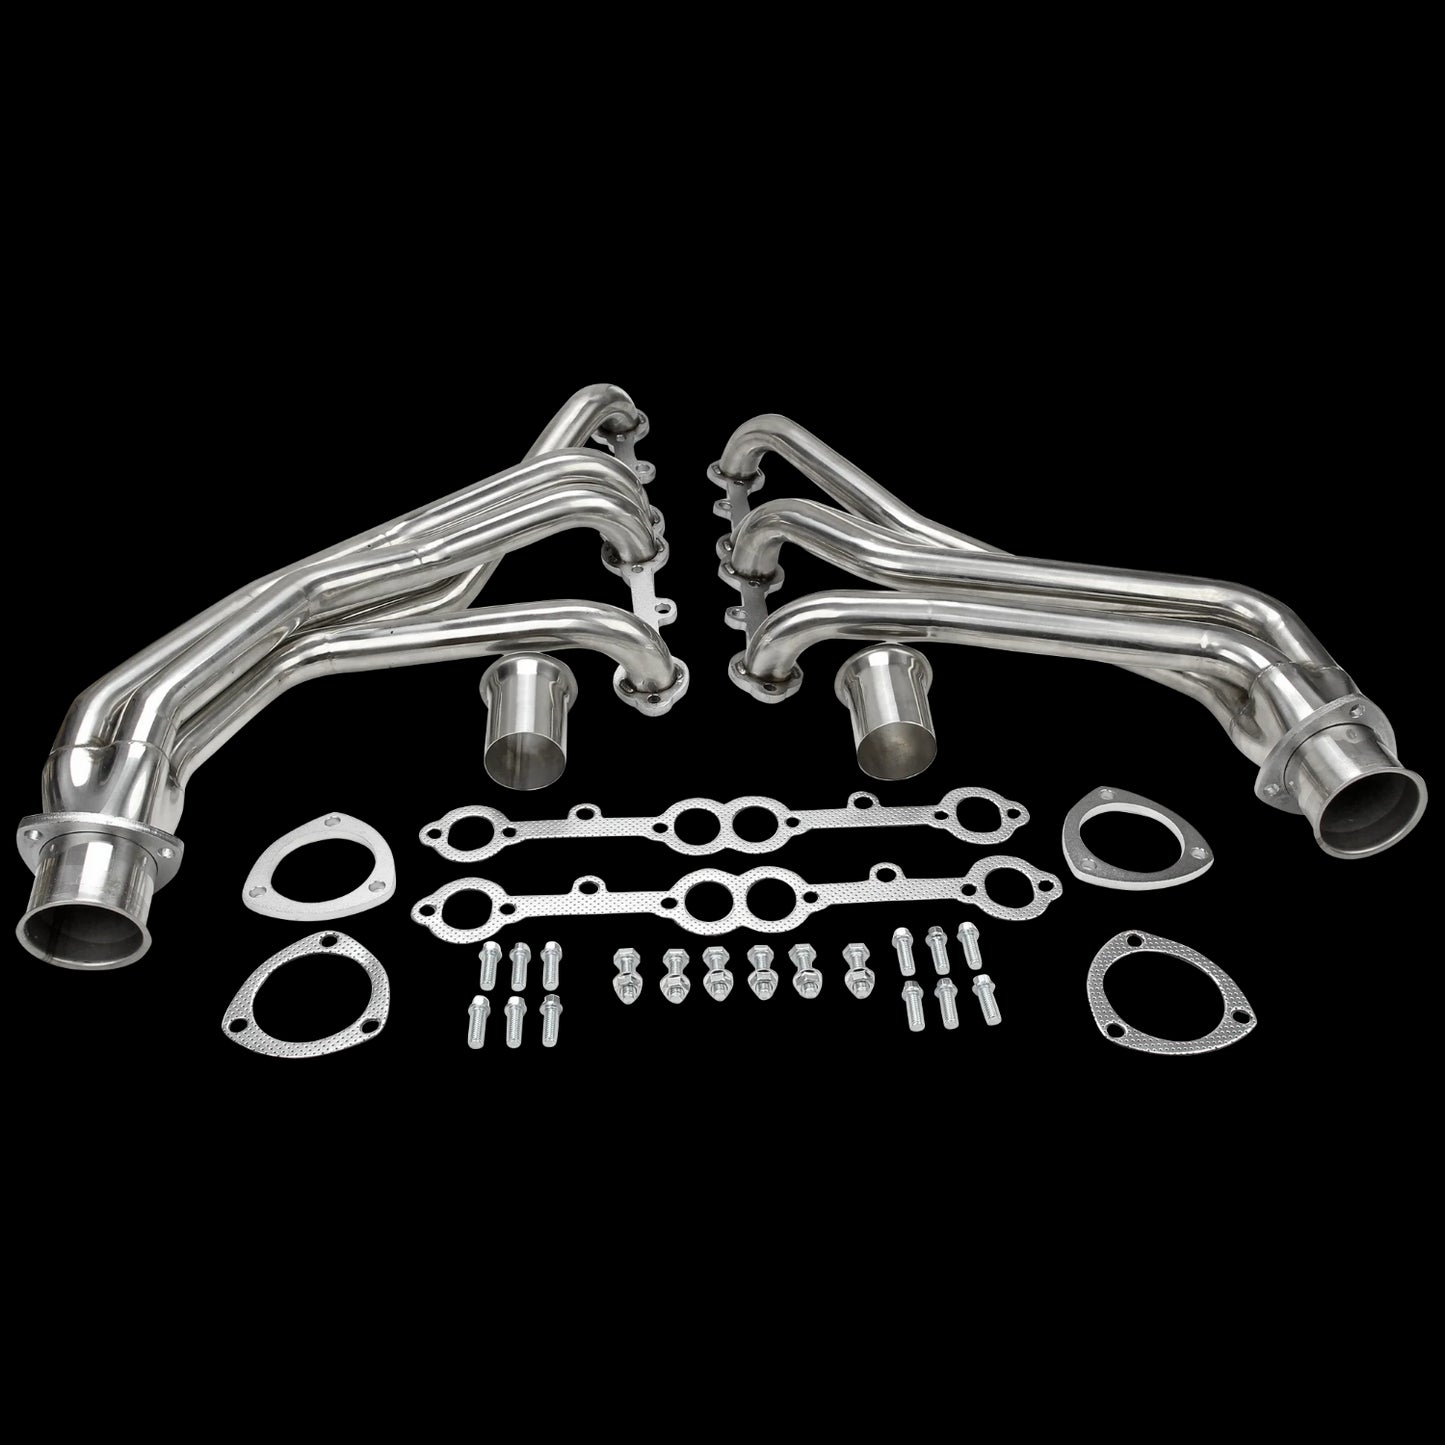 Stainless Steel Exhaust Manifold Header for Chevy Small Block 283/302/305/307/327/350/400 V8 Engine